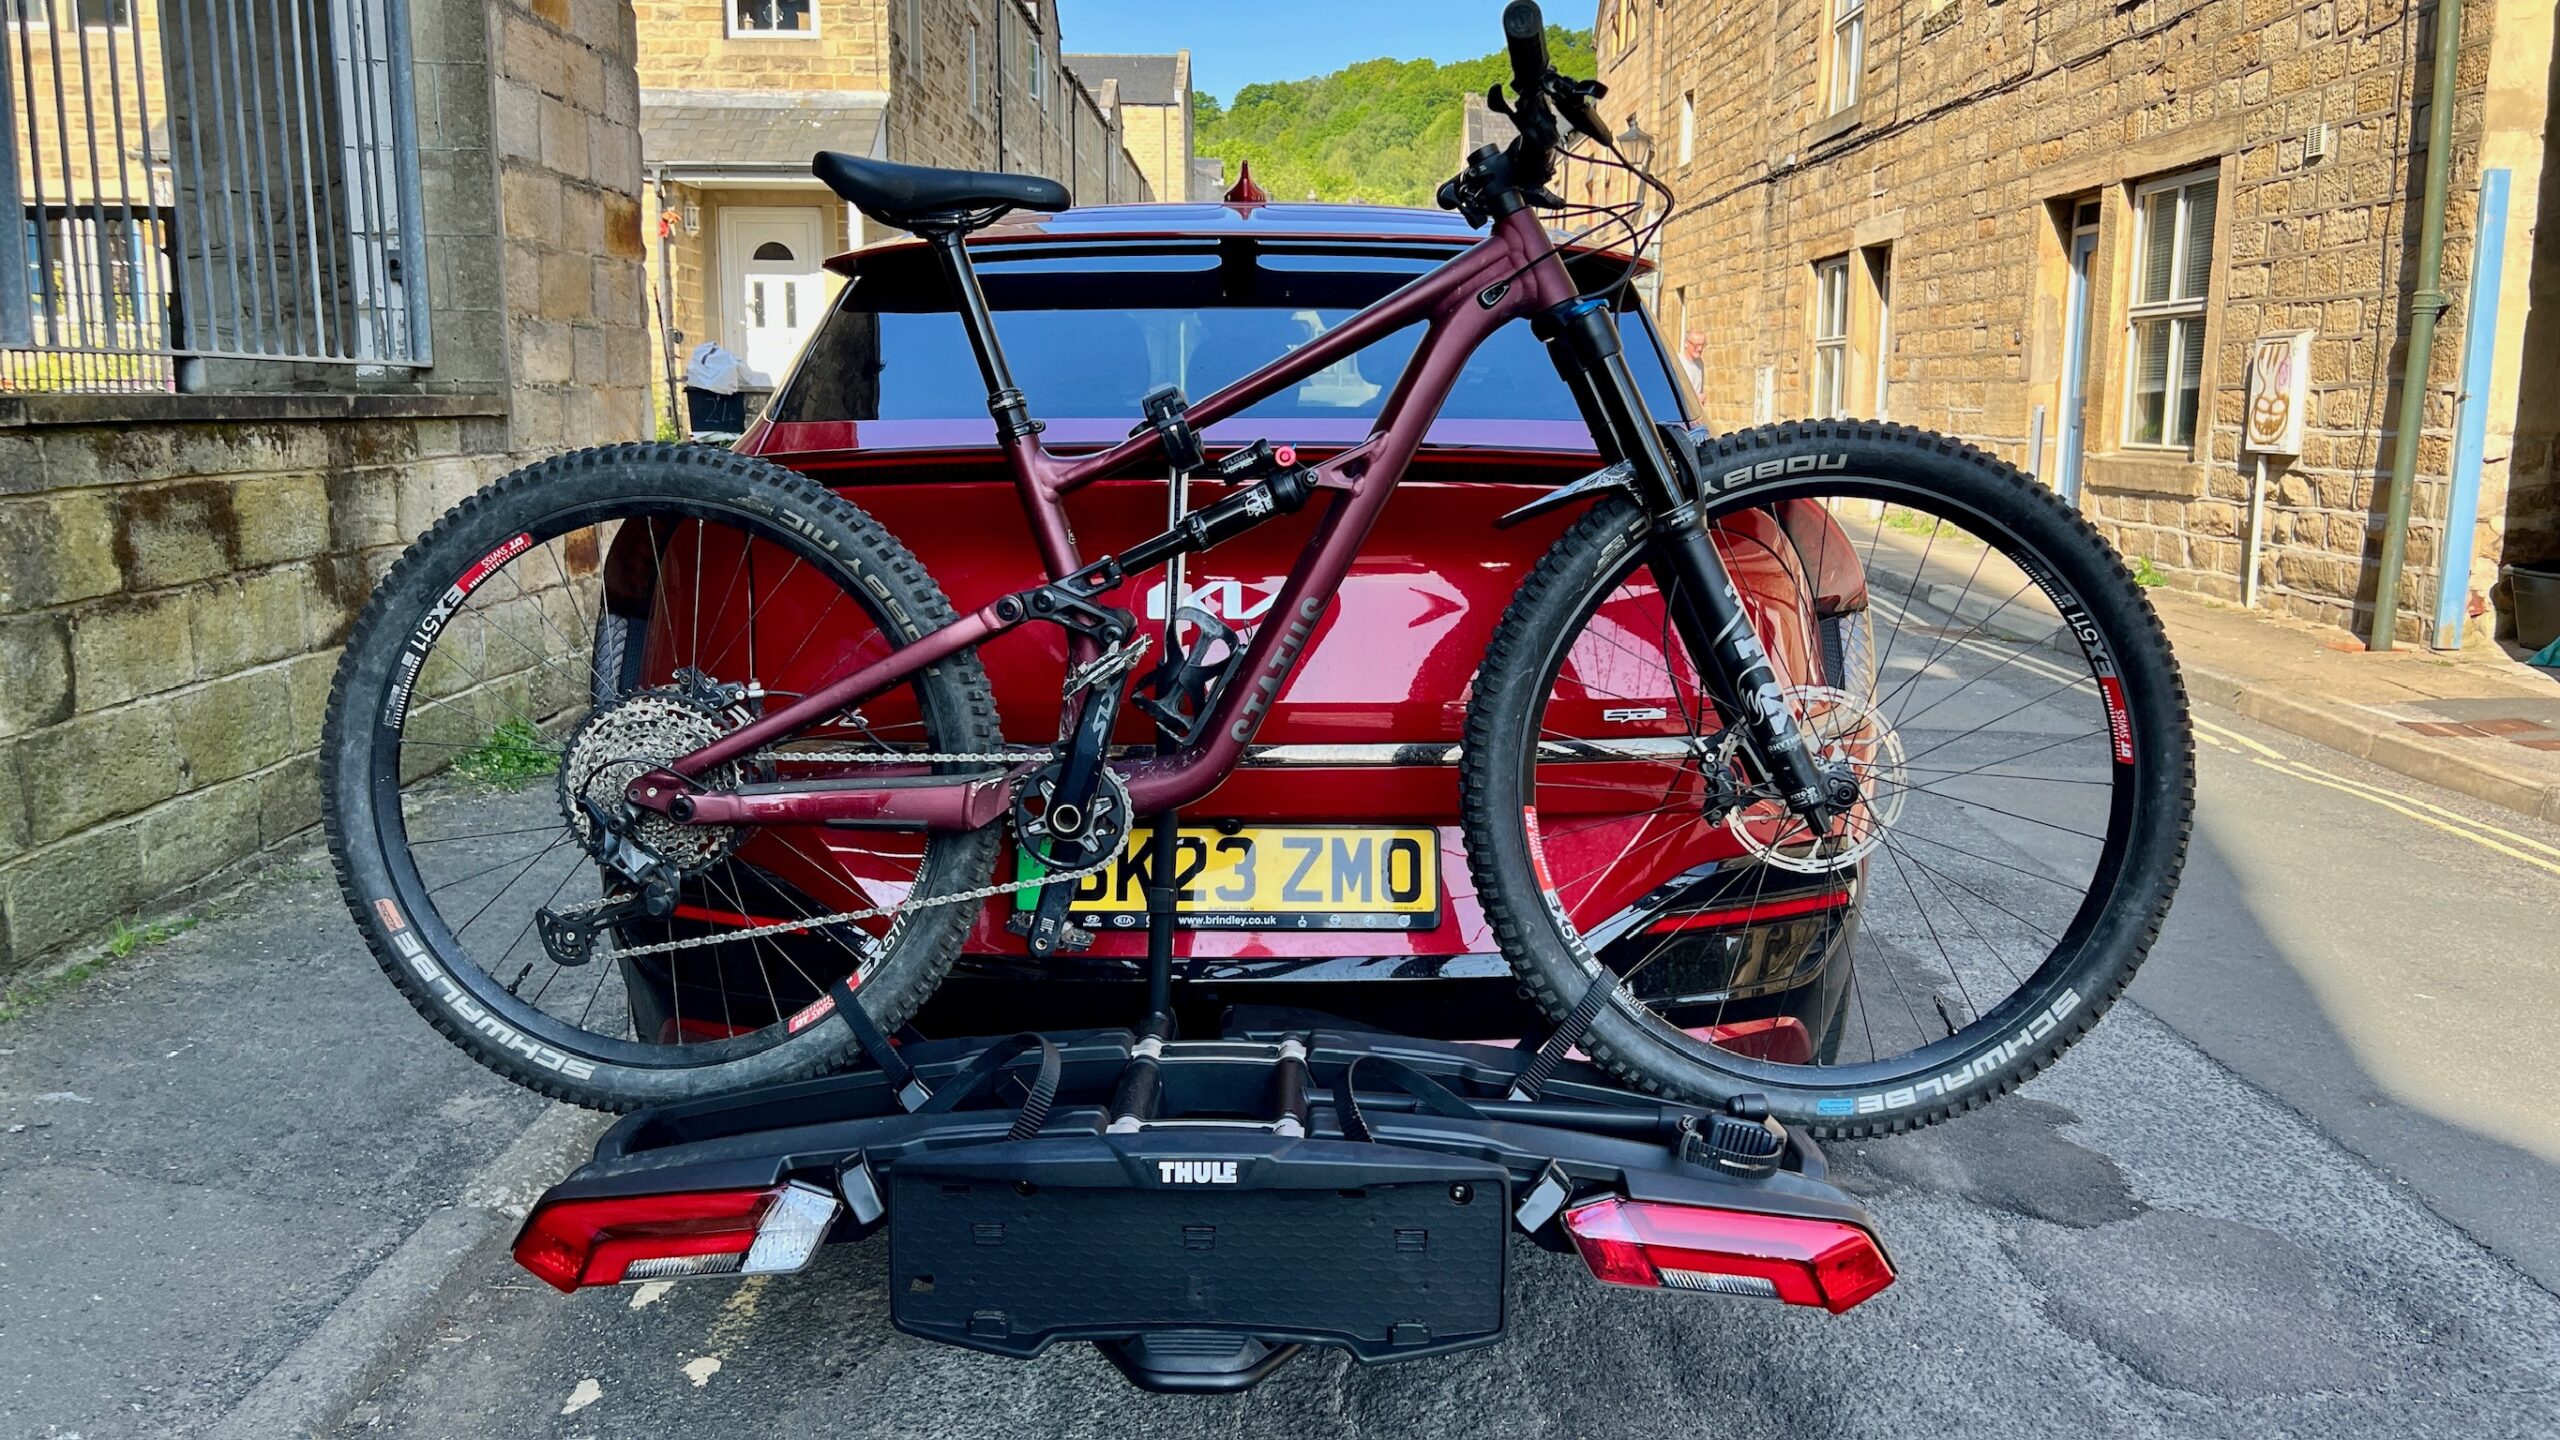 Thule Epos Bike Rack Review: The Game-Changer for Every Adventurer